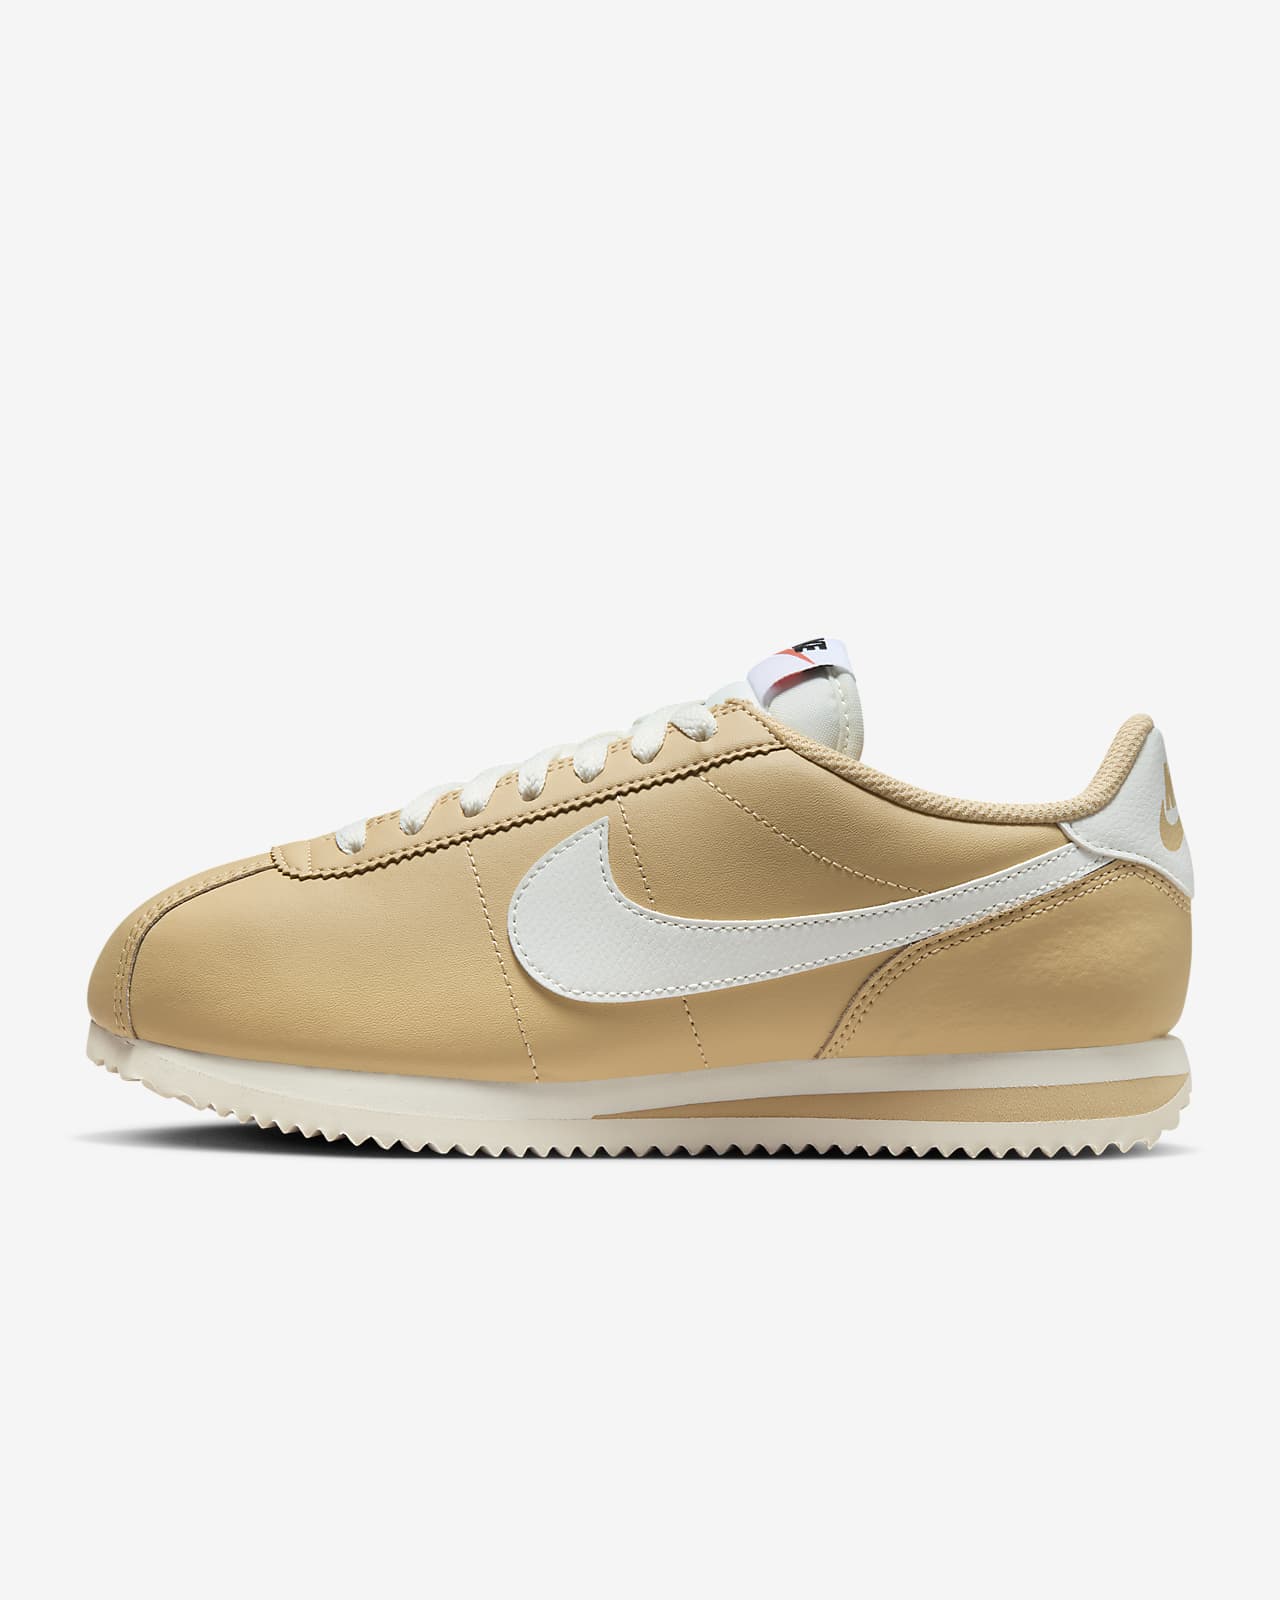 Chaussure Nike Cortez Leather